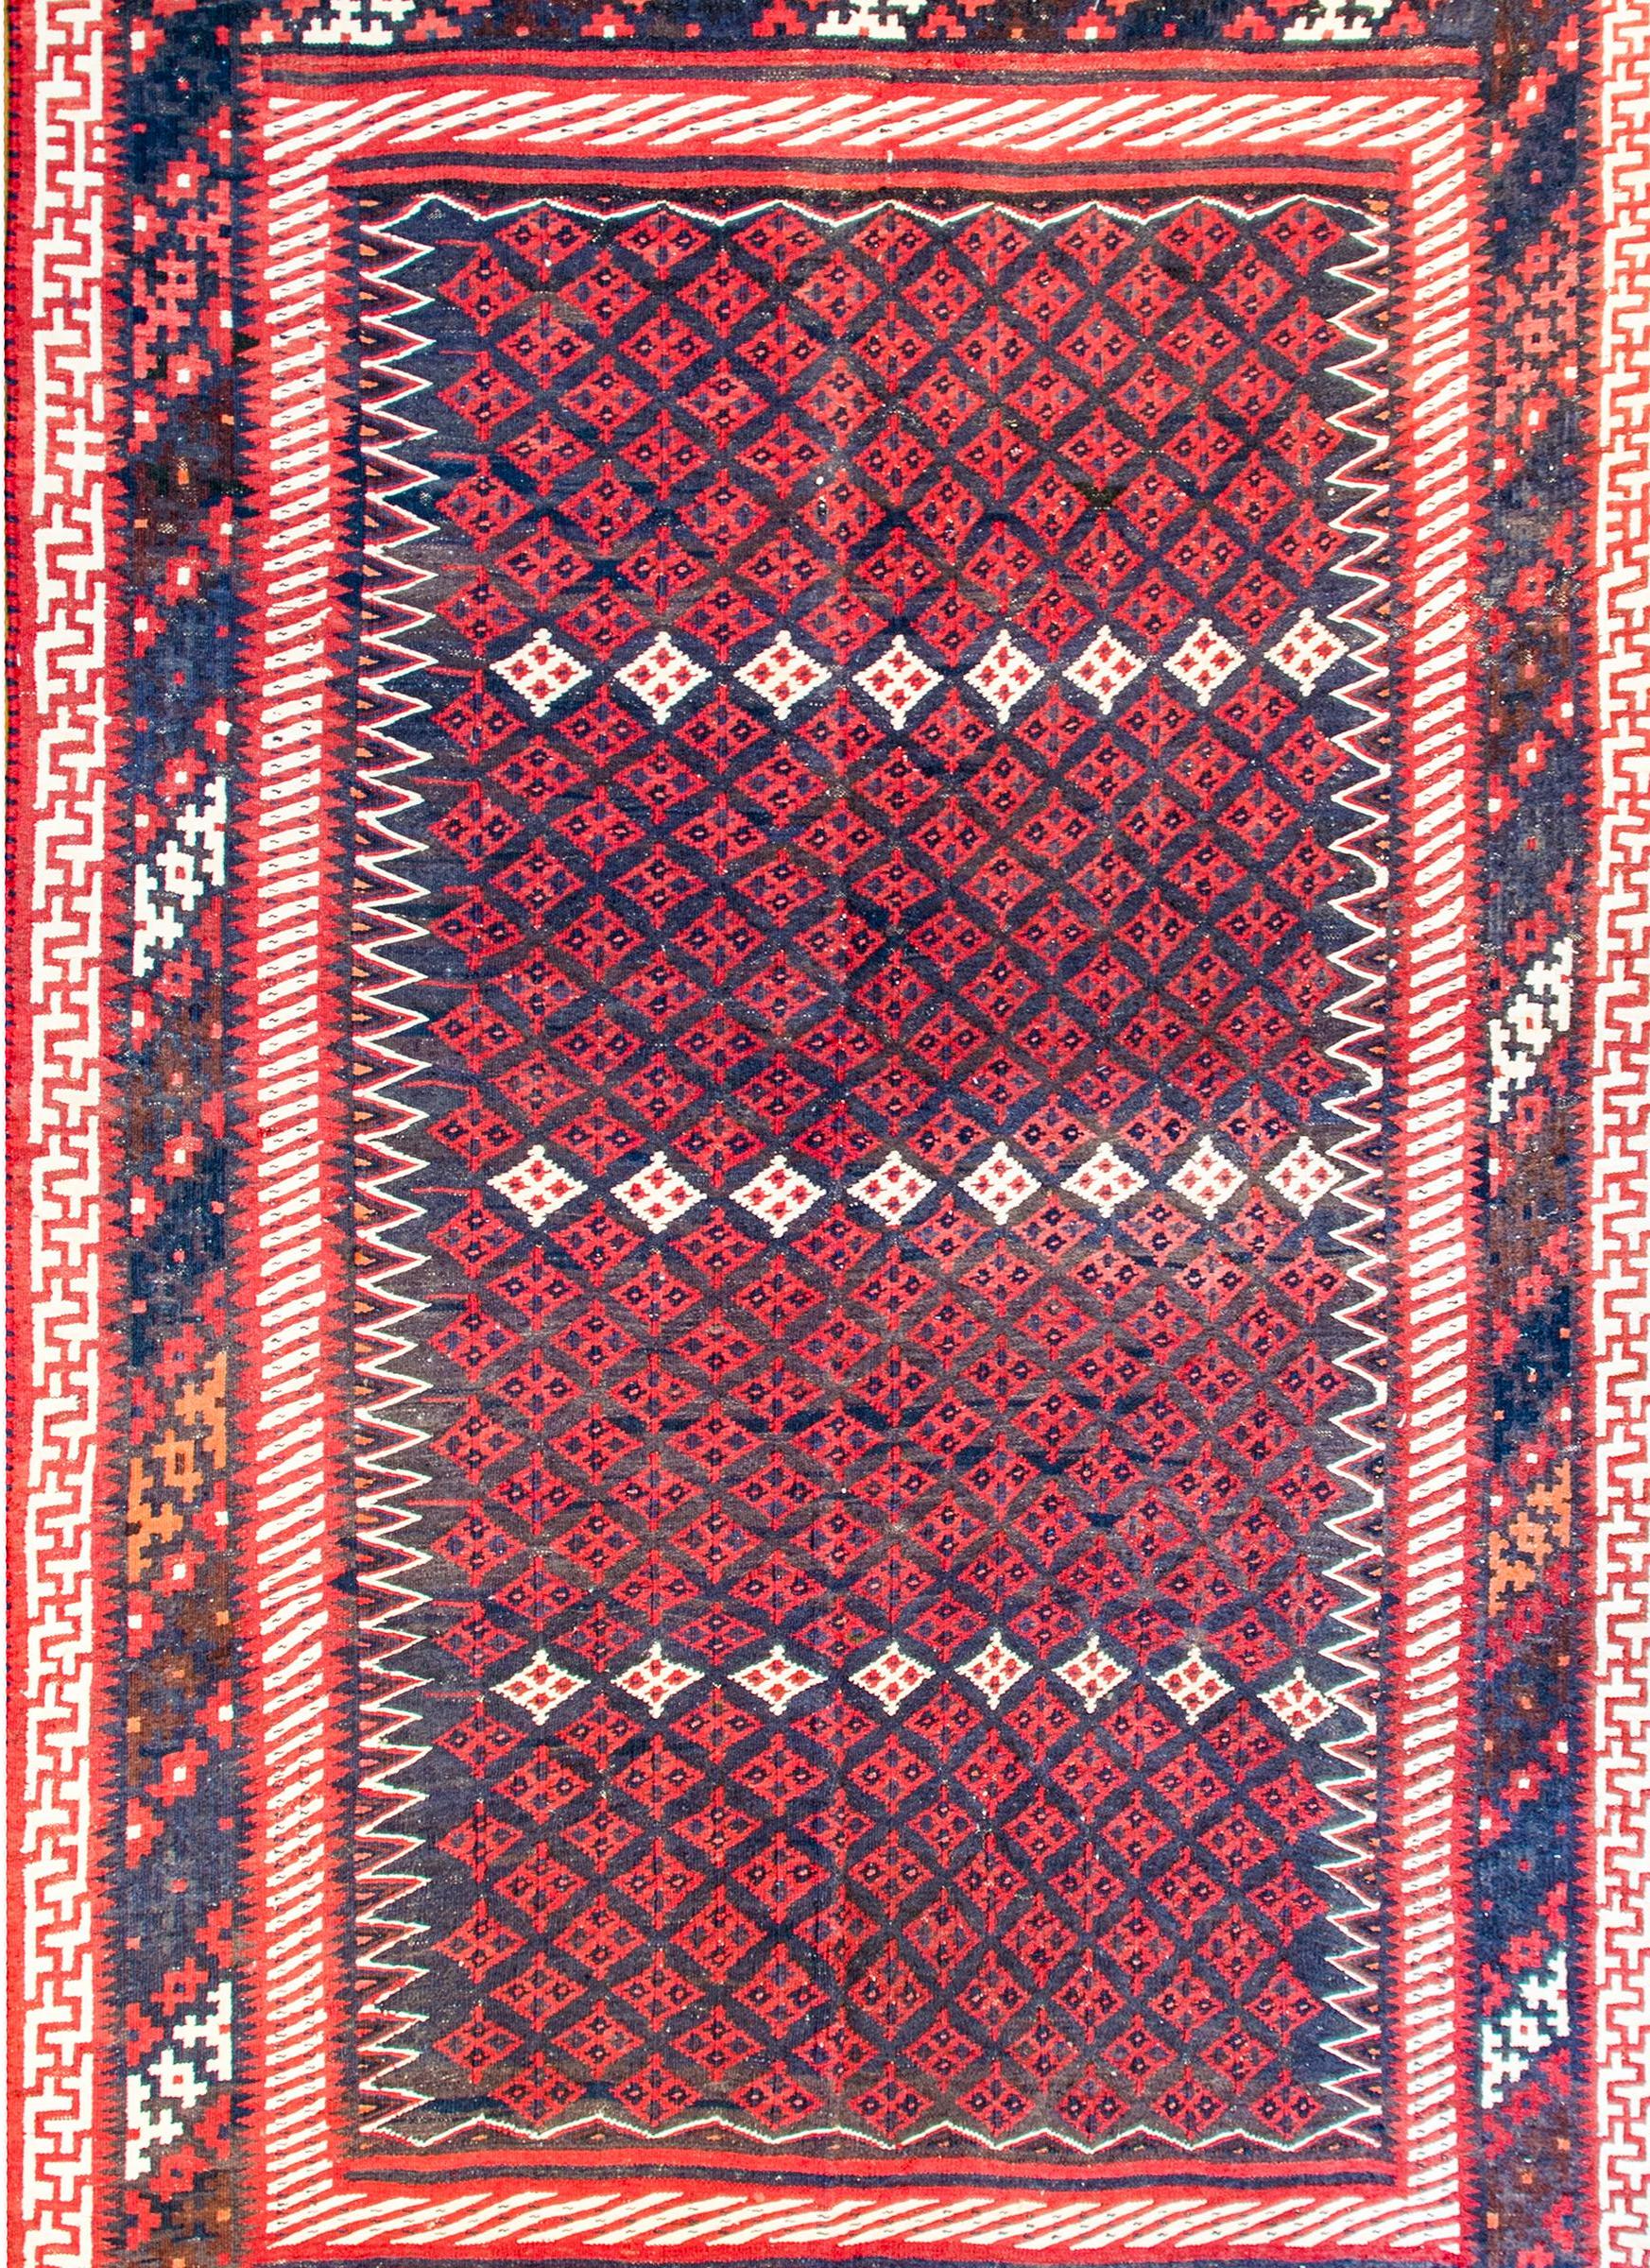 An early 20th century Persian Khorasan Sumak rug with an all-over crimson diamond pattern with three rows of white diamonds, on an indigo background. The border is complex with four distinct geometric patterns woven in crimson, indigo, white, and